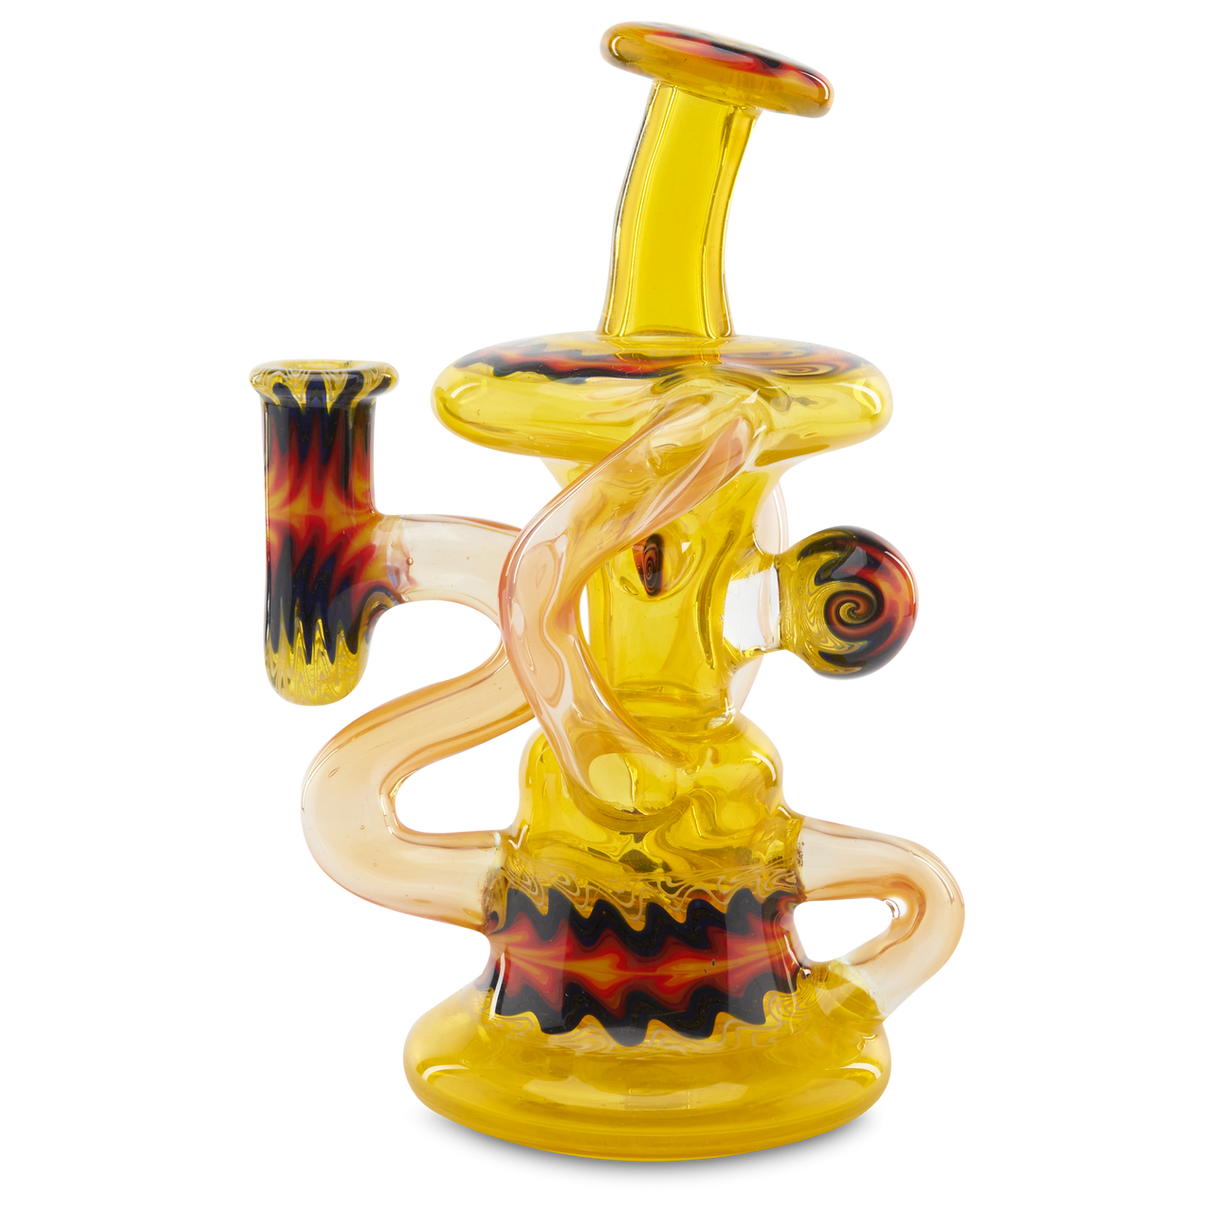 Andy G Transparent Klein one of a kind concentrate dab rig